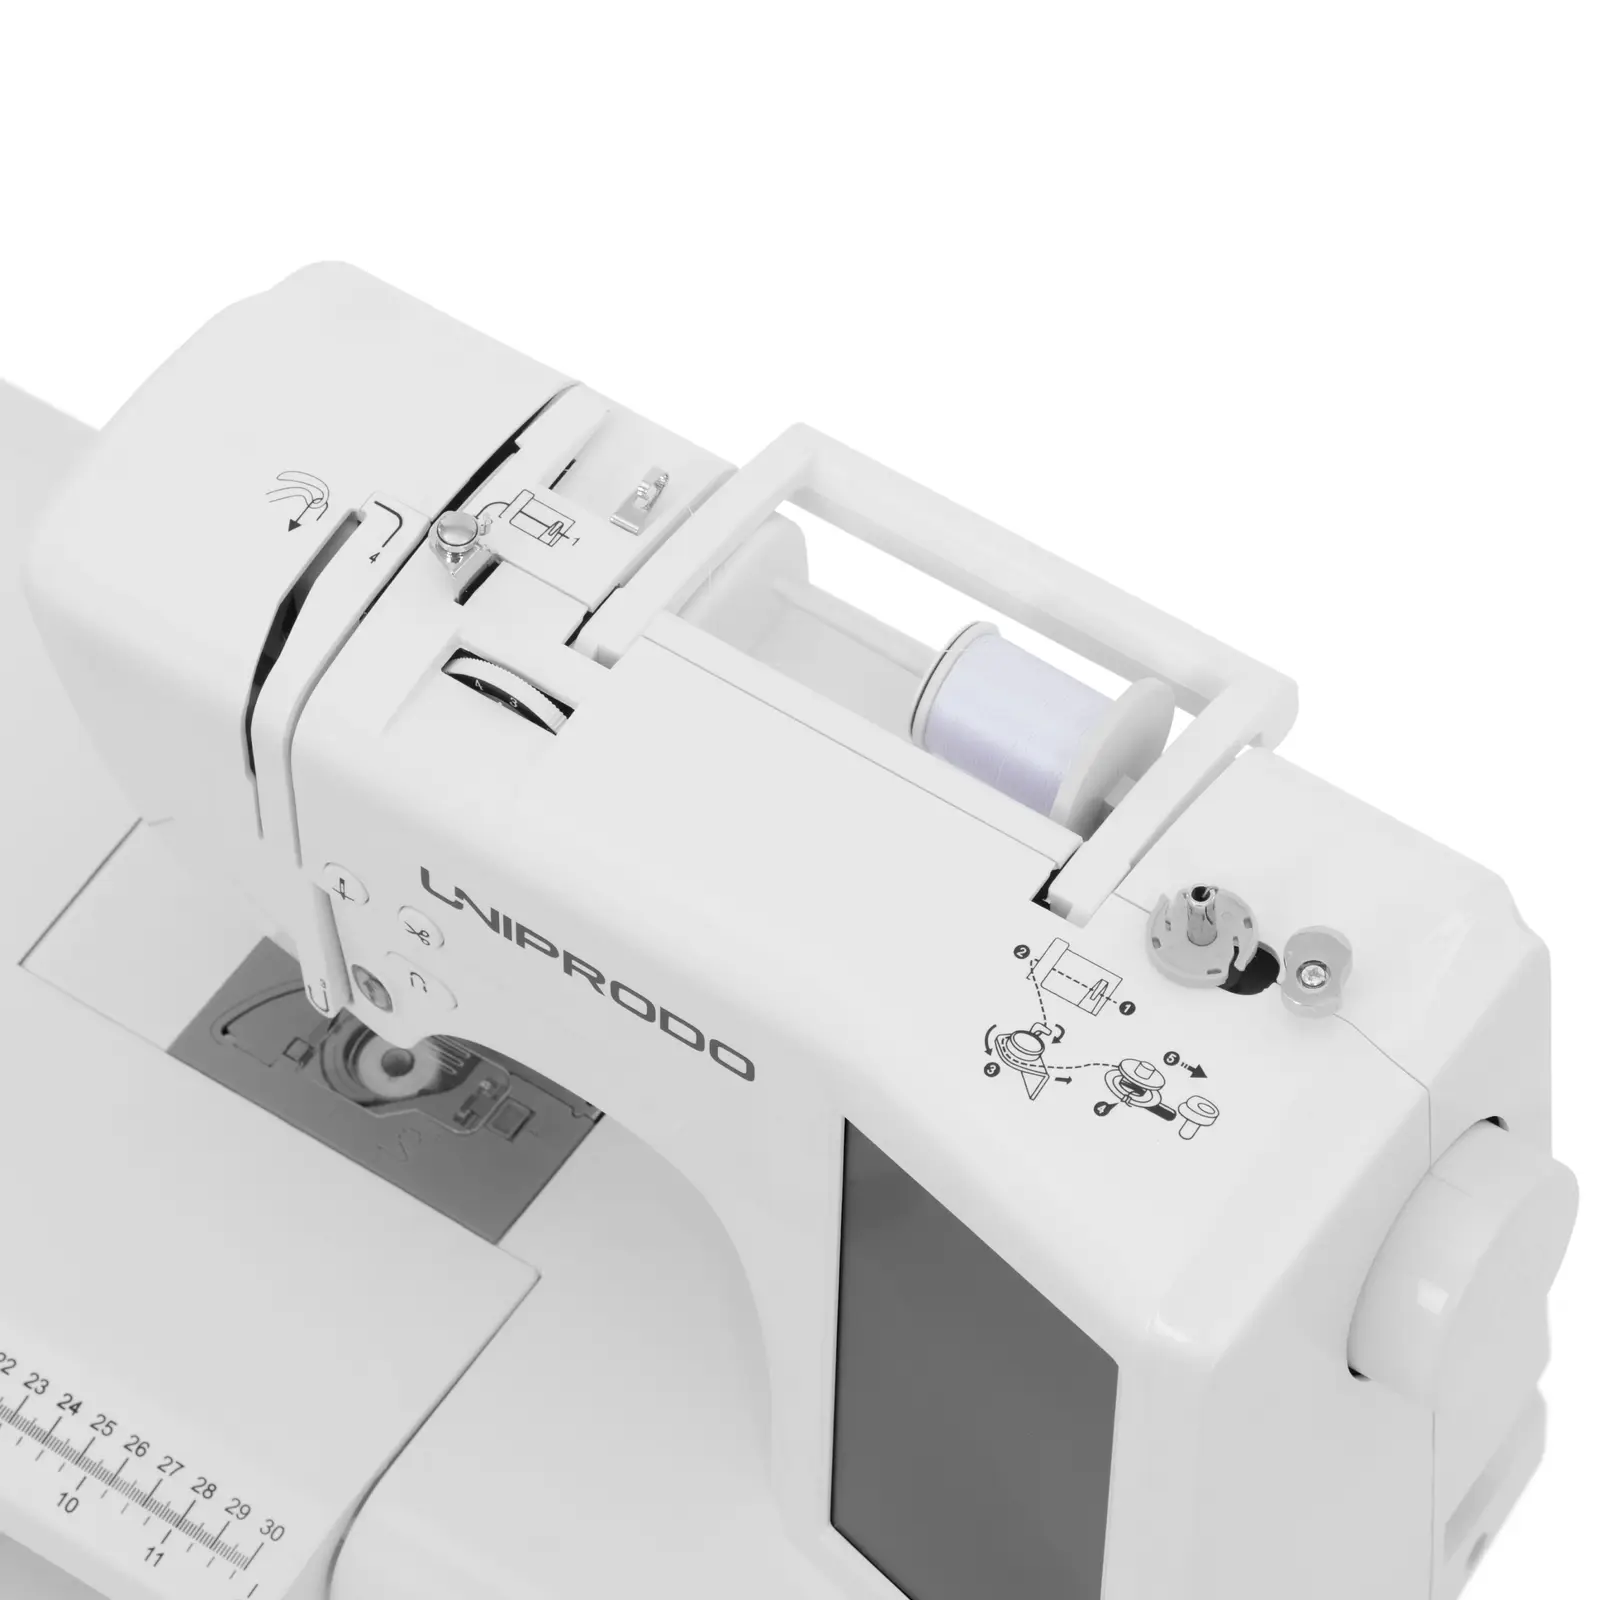 Sewing and Embroidery Machine - 160 stitches - 96 embroidery patterns - touch LCD